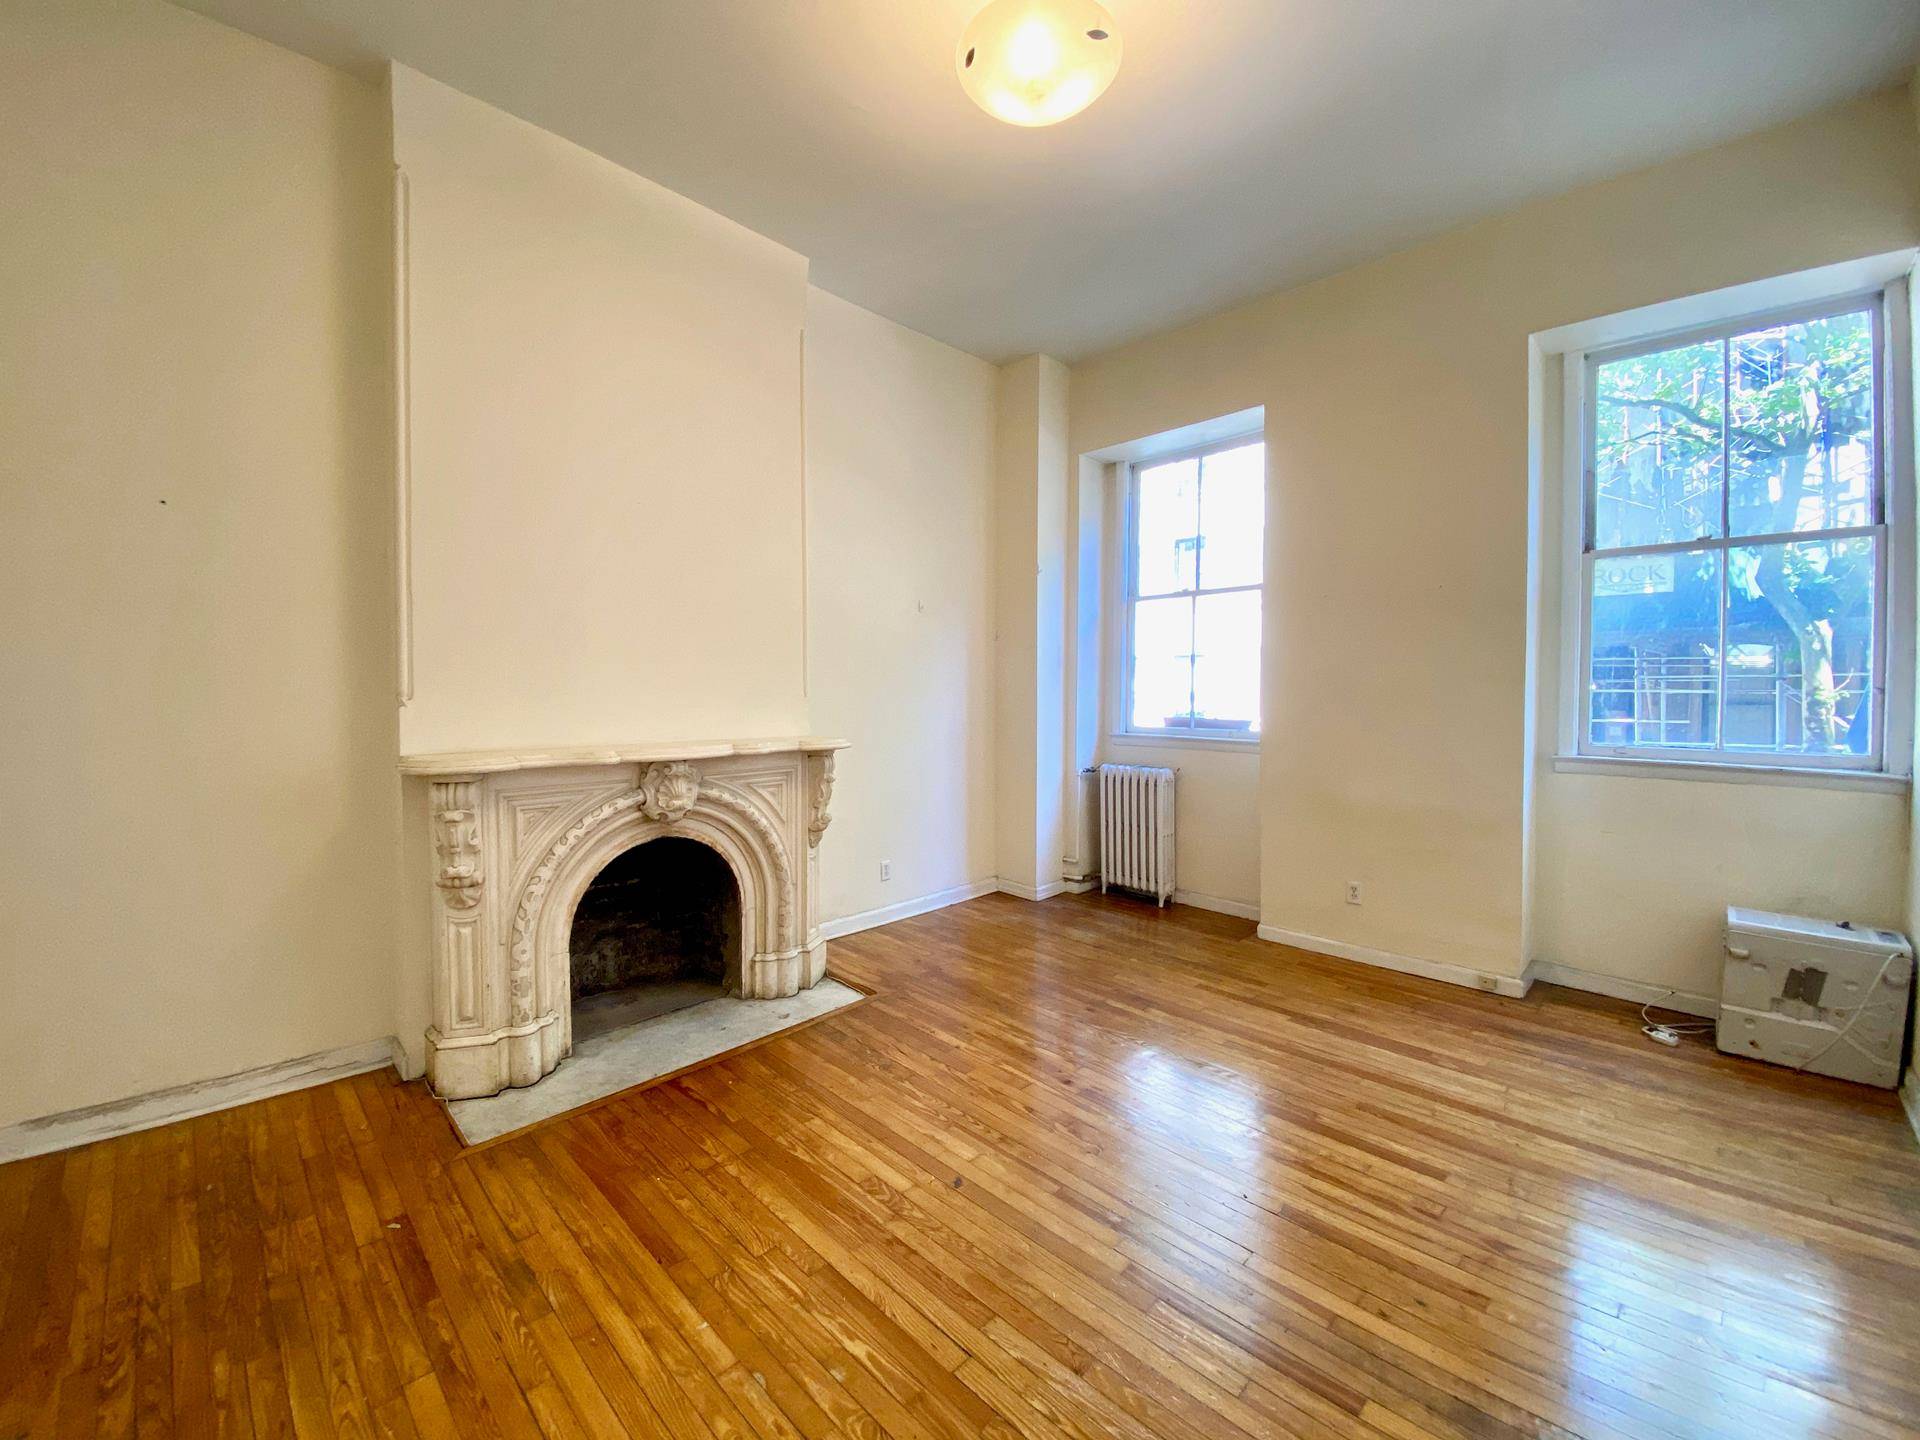 Located on one of the most sought after blocks in all of Brooklyn is the 173 Columbia Heights, and situated on the second floor of this charming walk up is ...